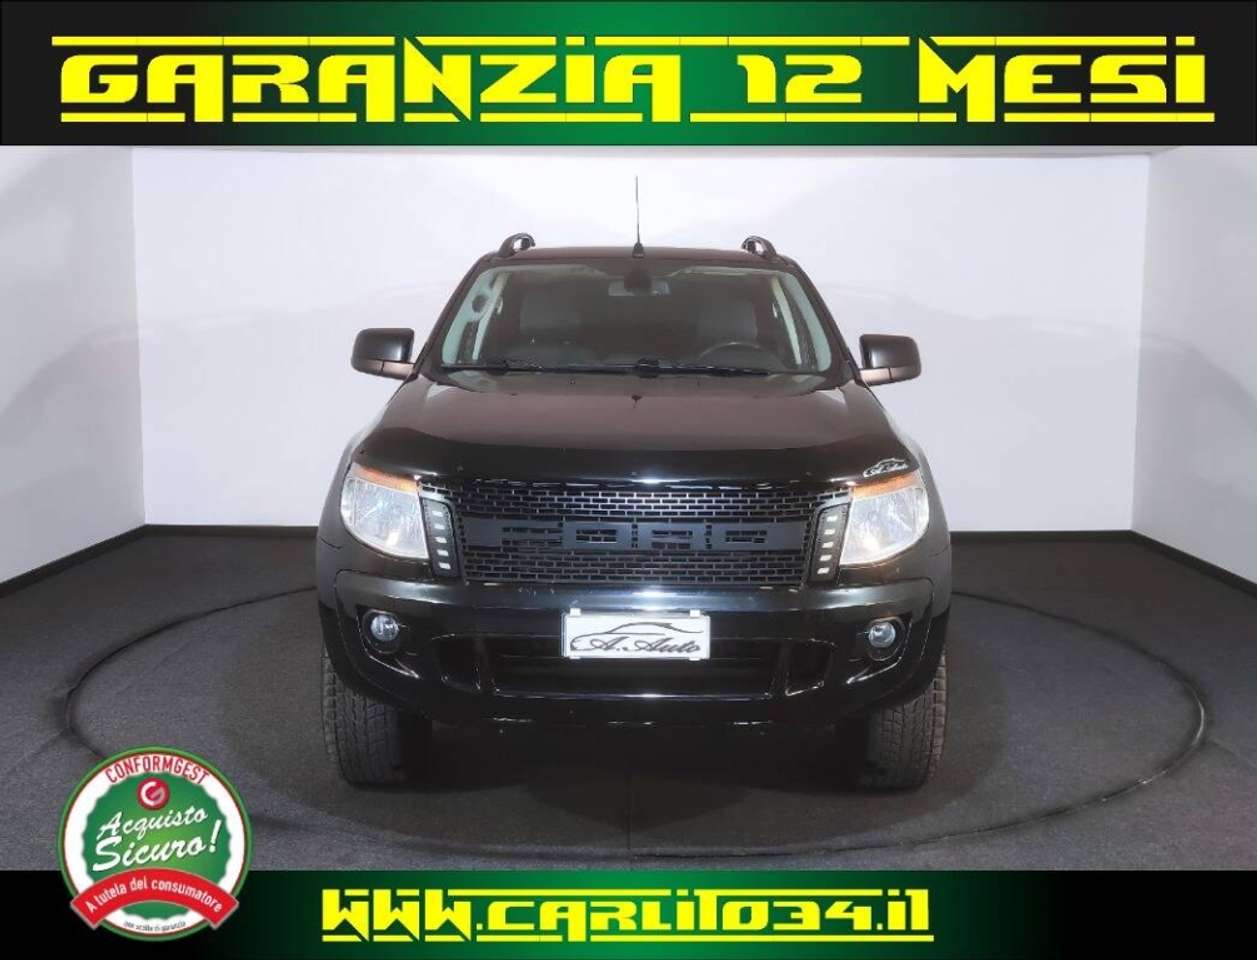 Ford Ranger 2.2 tdci double cab XLT